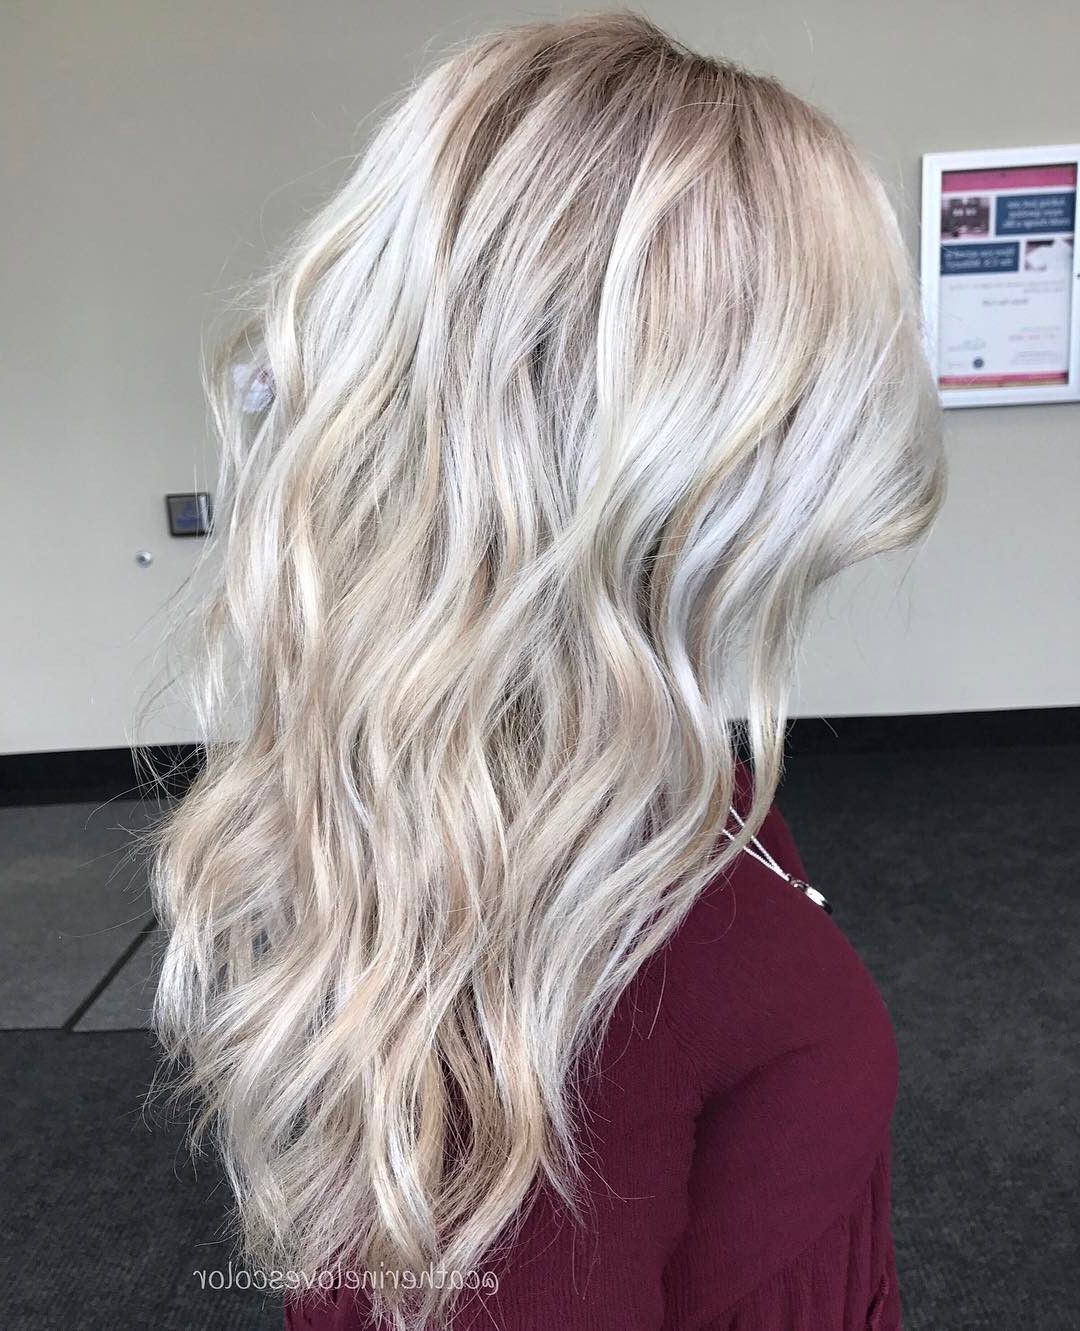 20 Adorable Ash Blonde Hairstyles To Try: Hair Color Ideas 2018 Throughout Dark Blonde Short Curly Hairstyles (View 12 of 20)